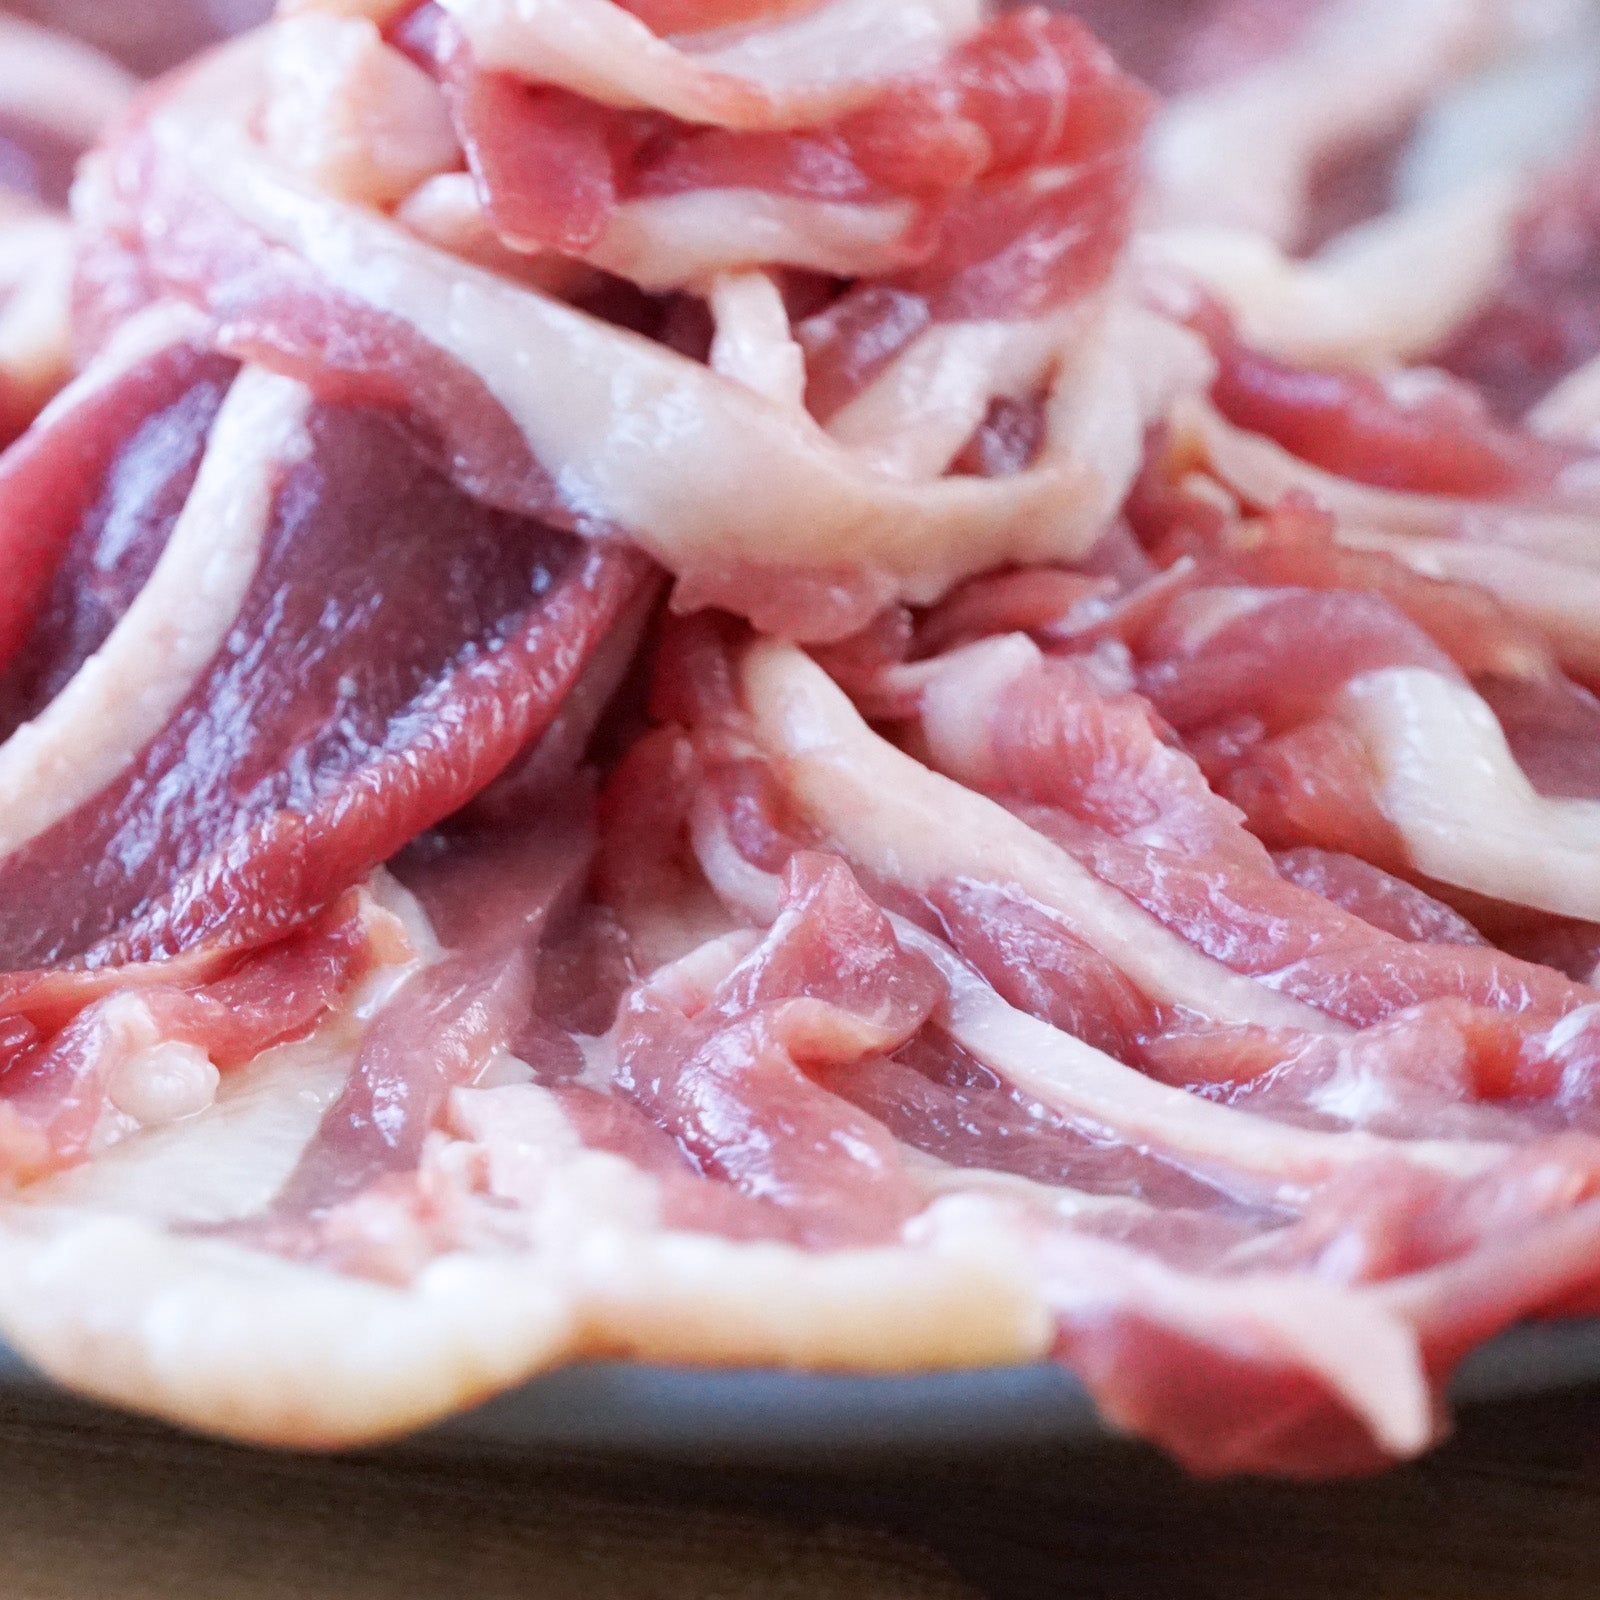 Free-Range Duck Breast and Leg Slices Mix from Kyoto (200g) - Horizon Farms